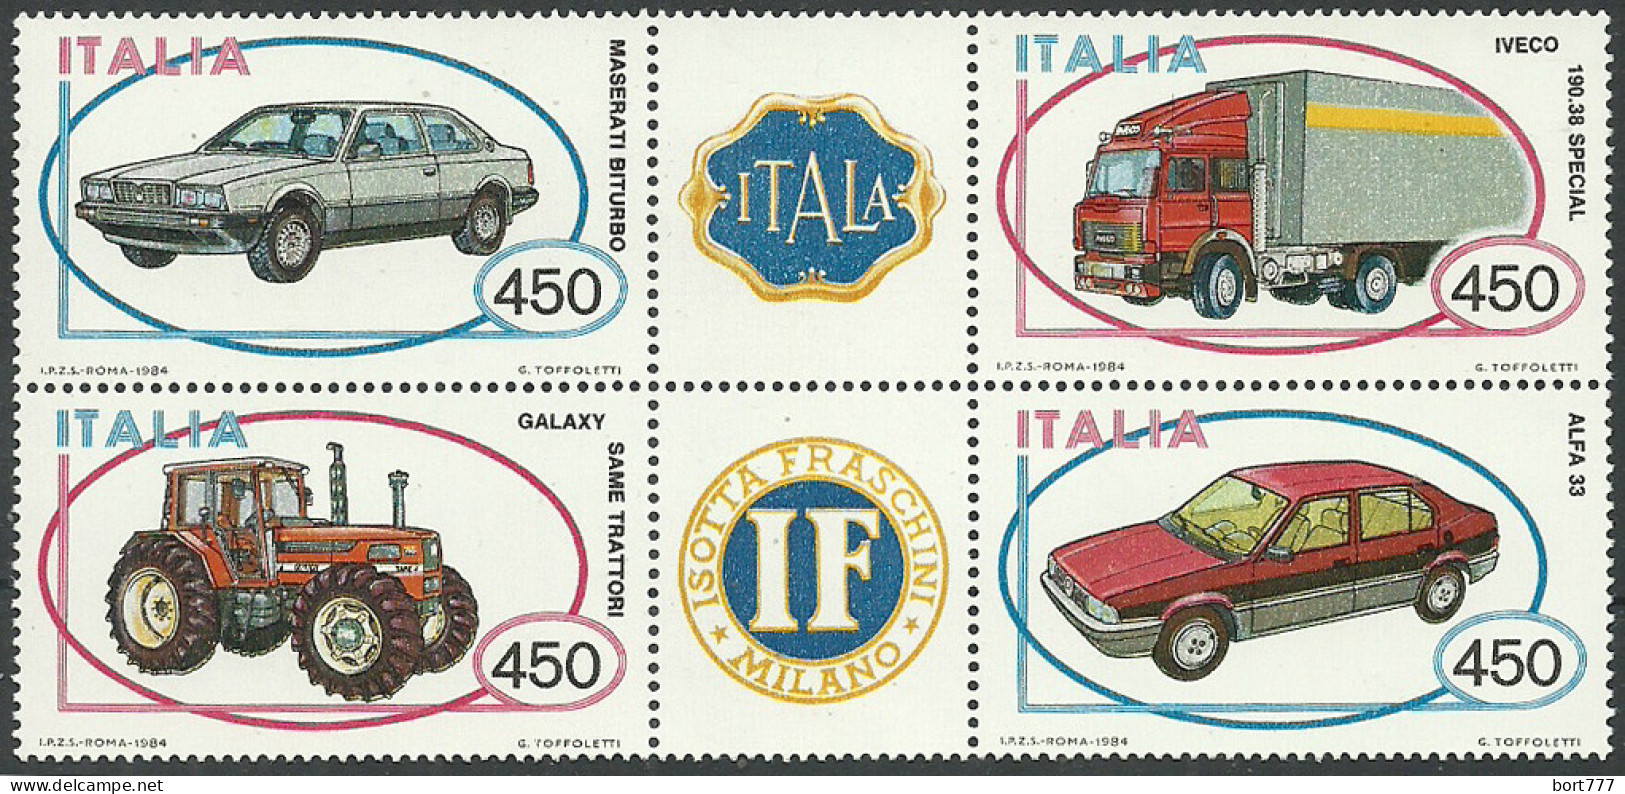 Italy 1984 Year, Mint MNH(**) Stamps , Michel # 1872-75 Vb. - 1981-90: Mint/hinged